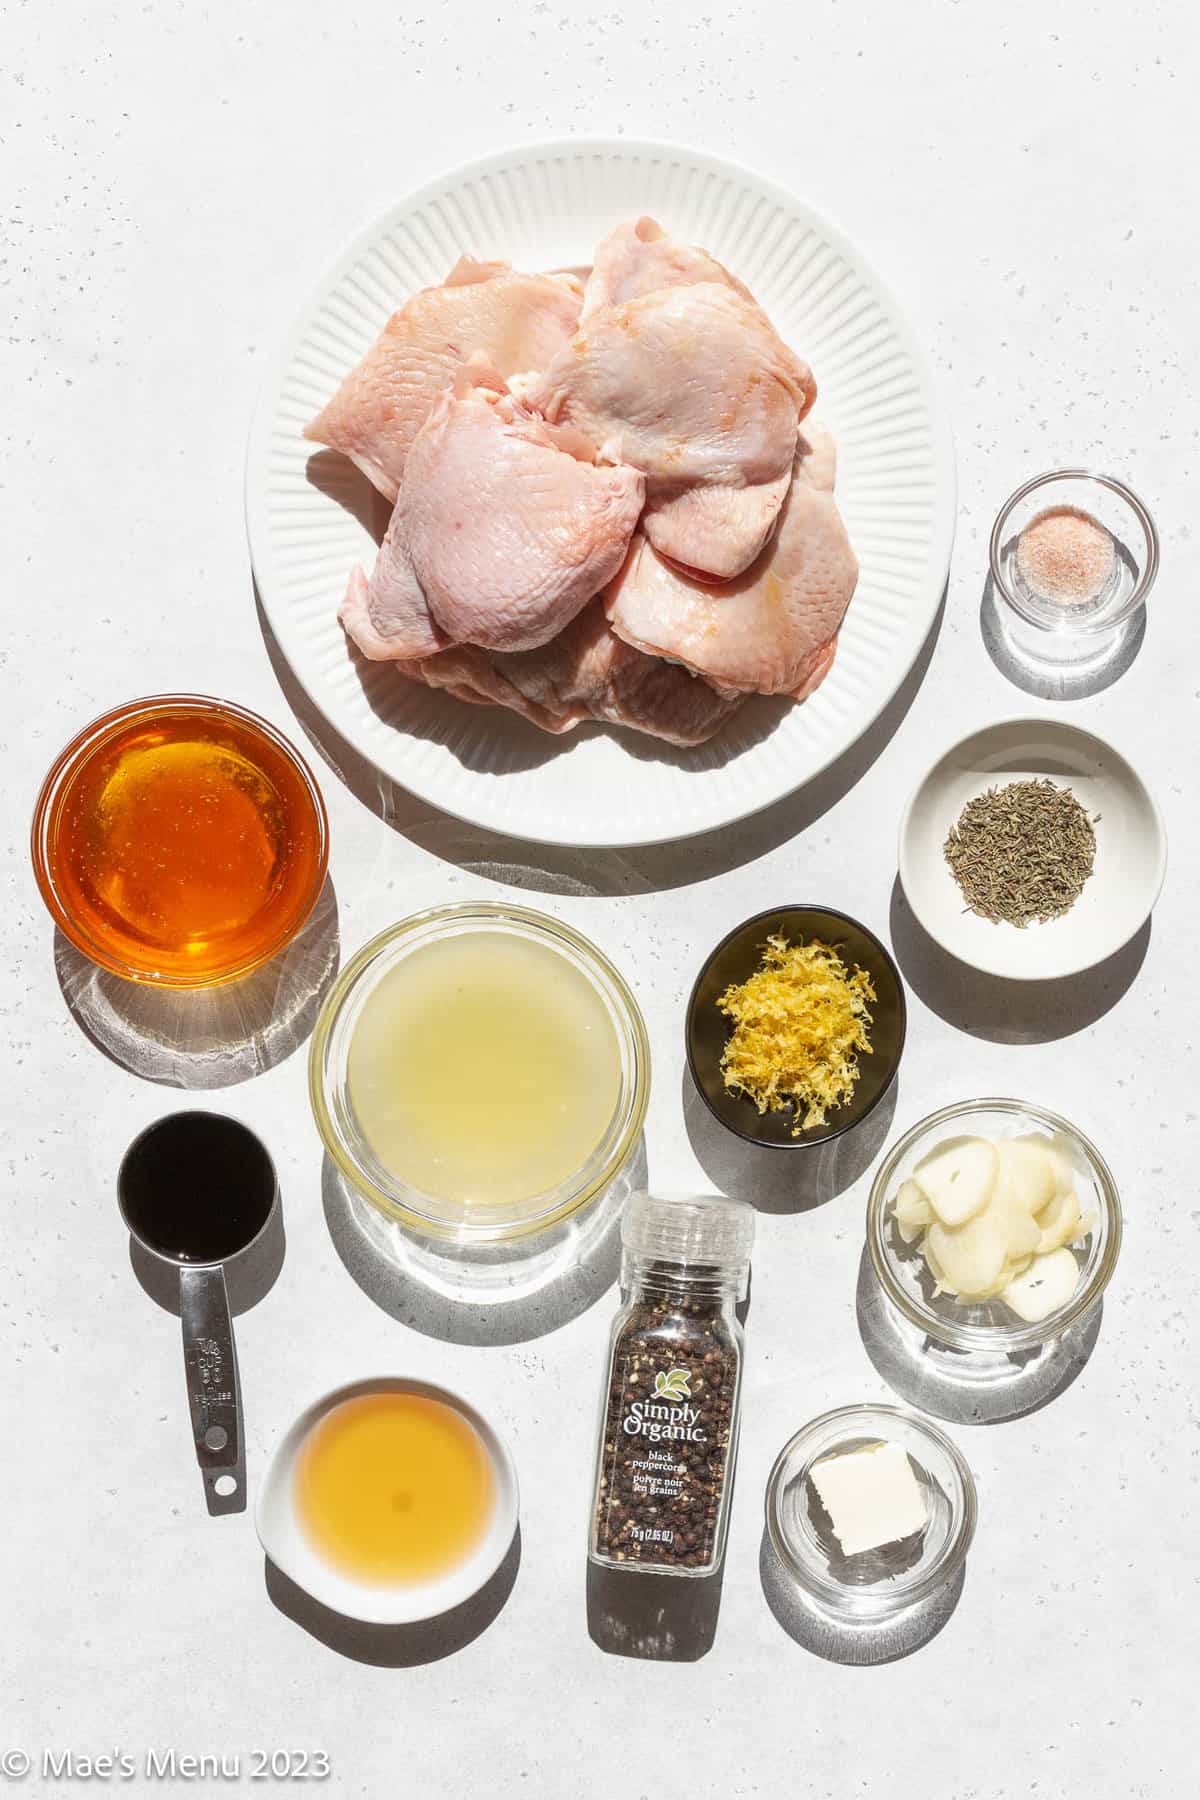 All of the ingredients for honey garlic lemon pepper chicken thighs.